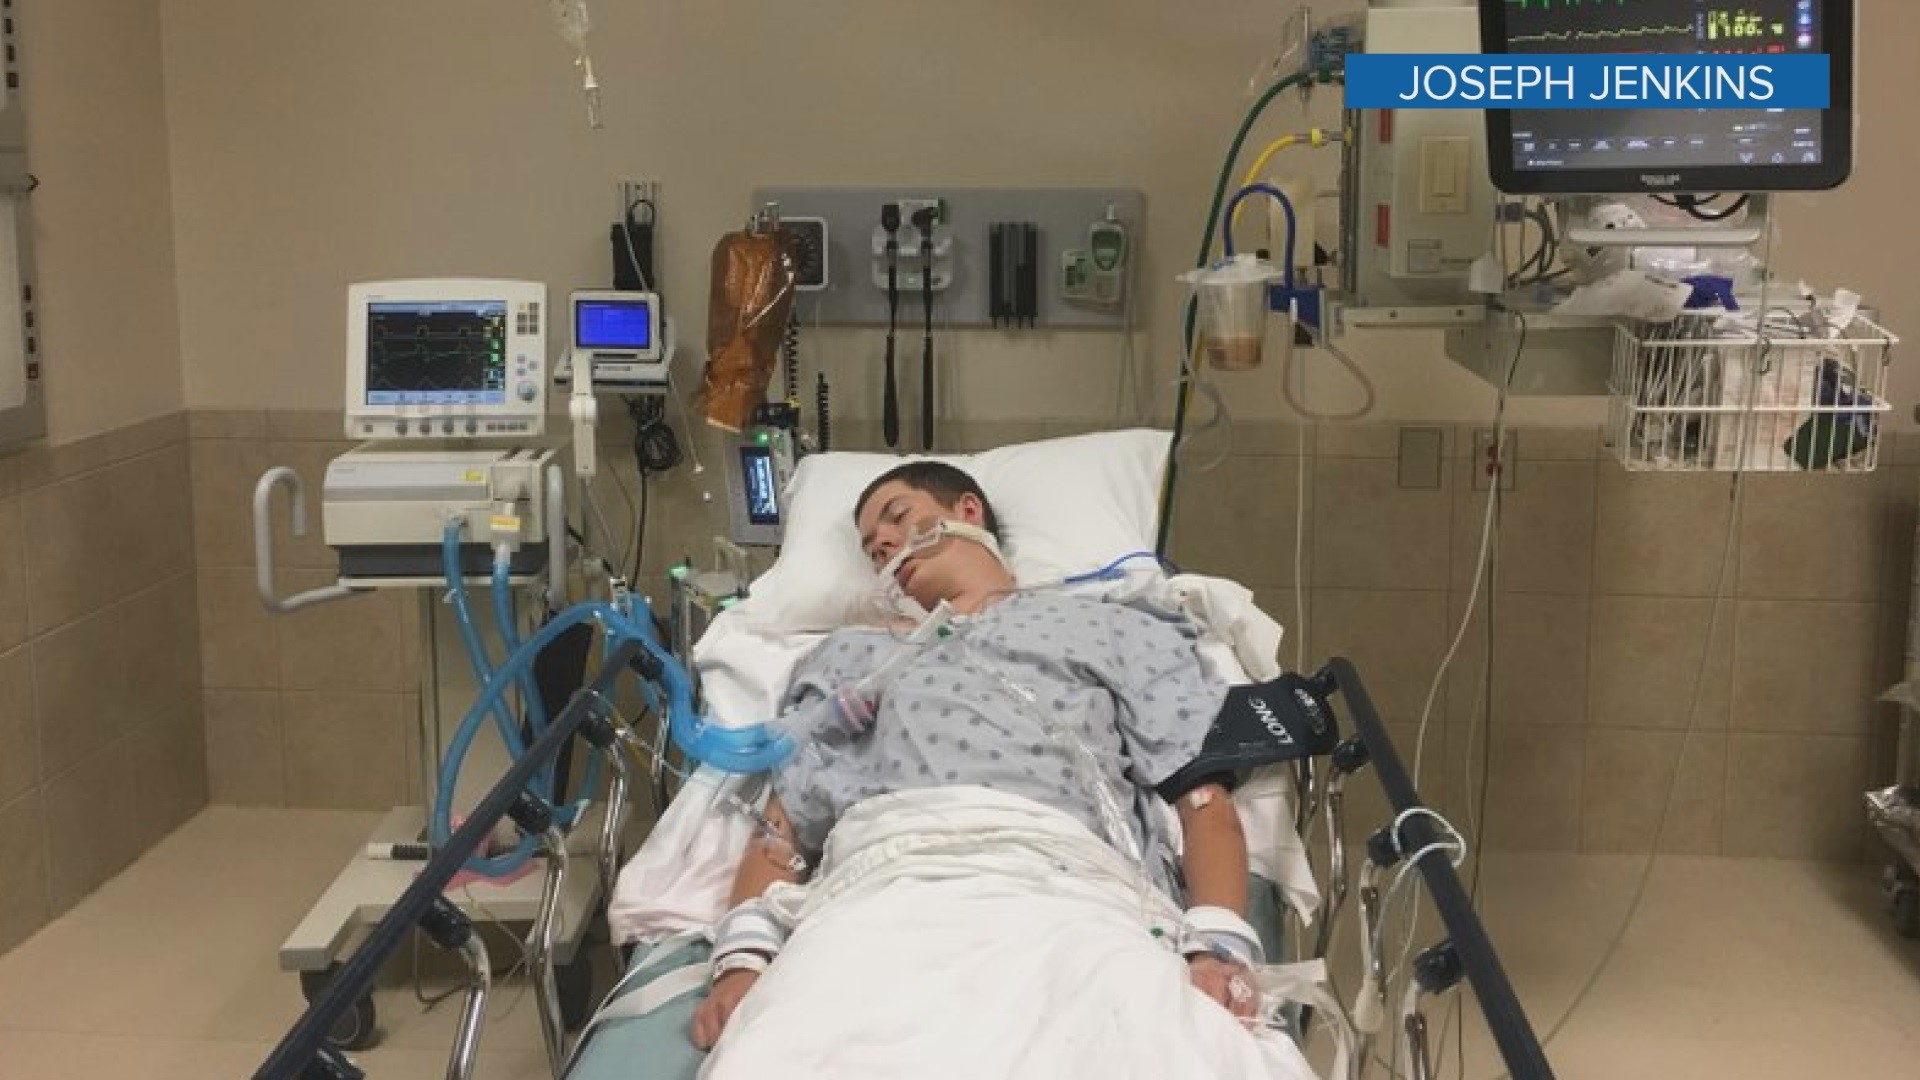 Jay Jenkins says he bought what was labeled as CBD at a convenience store but after taking a couple of hits, he realized something was wrong. He thought he could have died.